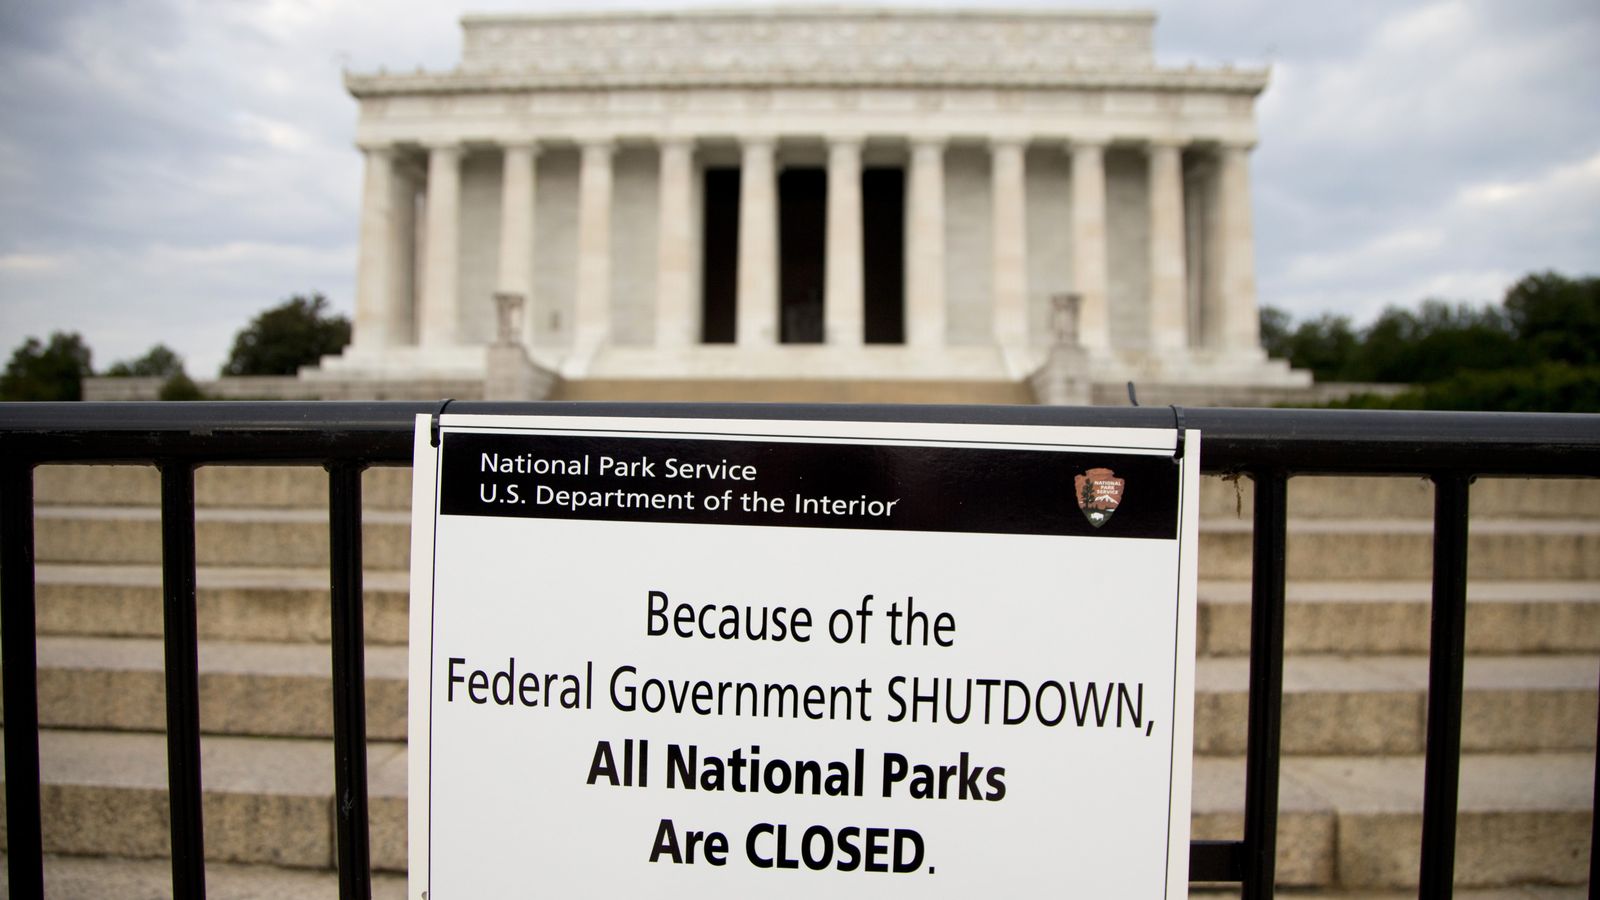 Government is the highest. Правительство Америки. American government. In Virginia a government shutdown Showdown.